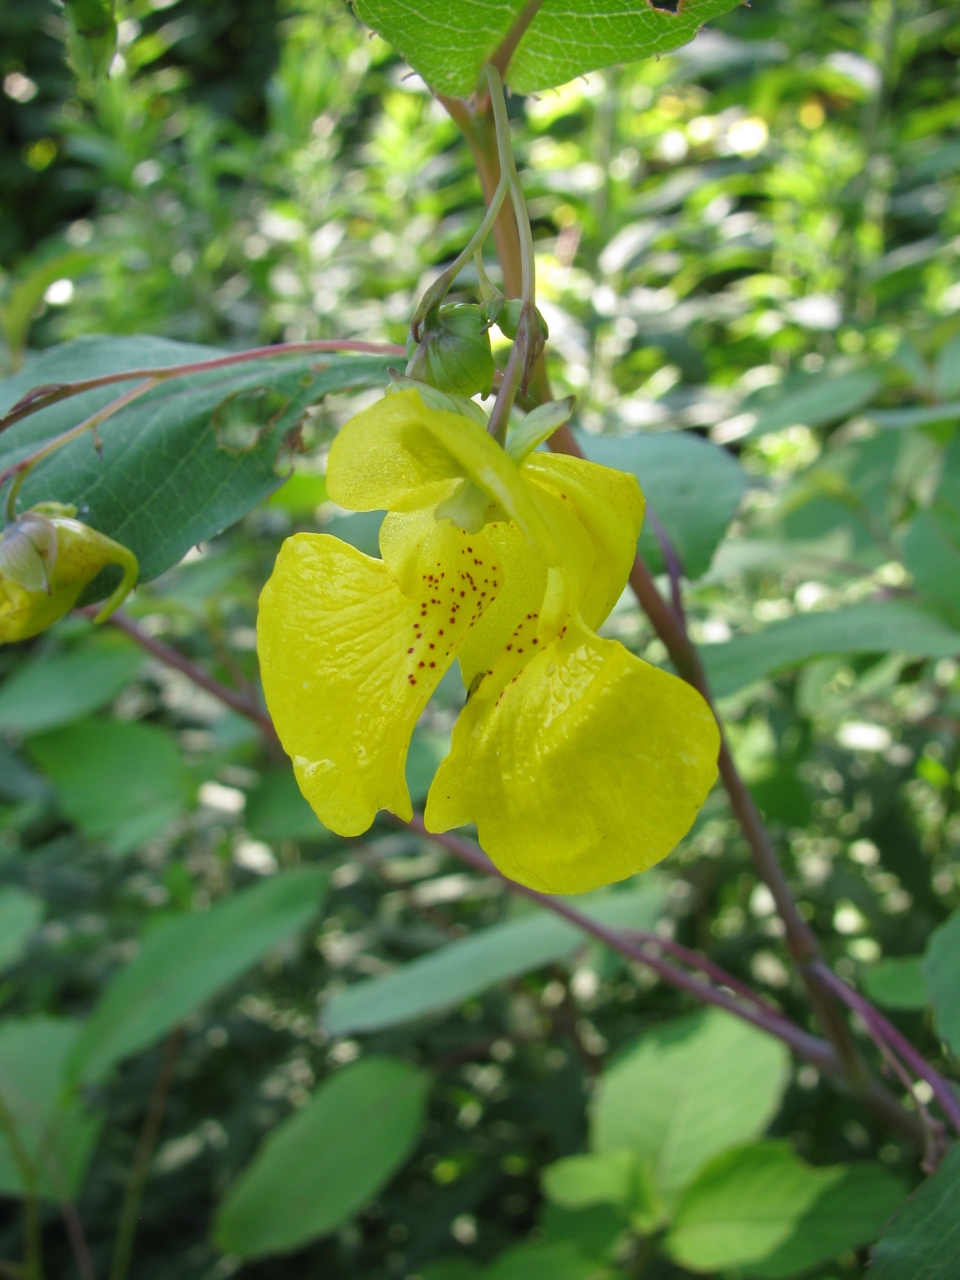 The Scientific Name is Impatiens pallida. You will likely hear them called Yellow Jewelweed, Yellow Touch-me-not, Pale Touch-me-not. This picture shows the Trumpet-shaped yellow flowers of Impatiens pallida